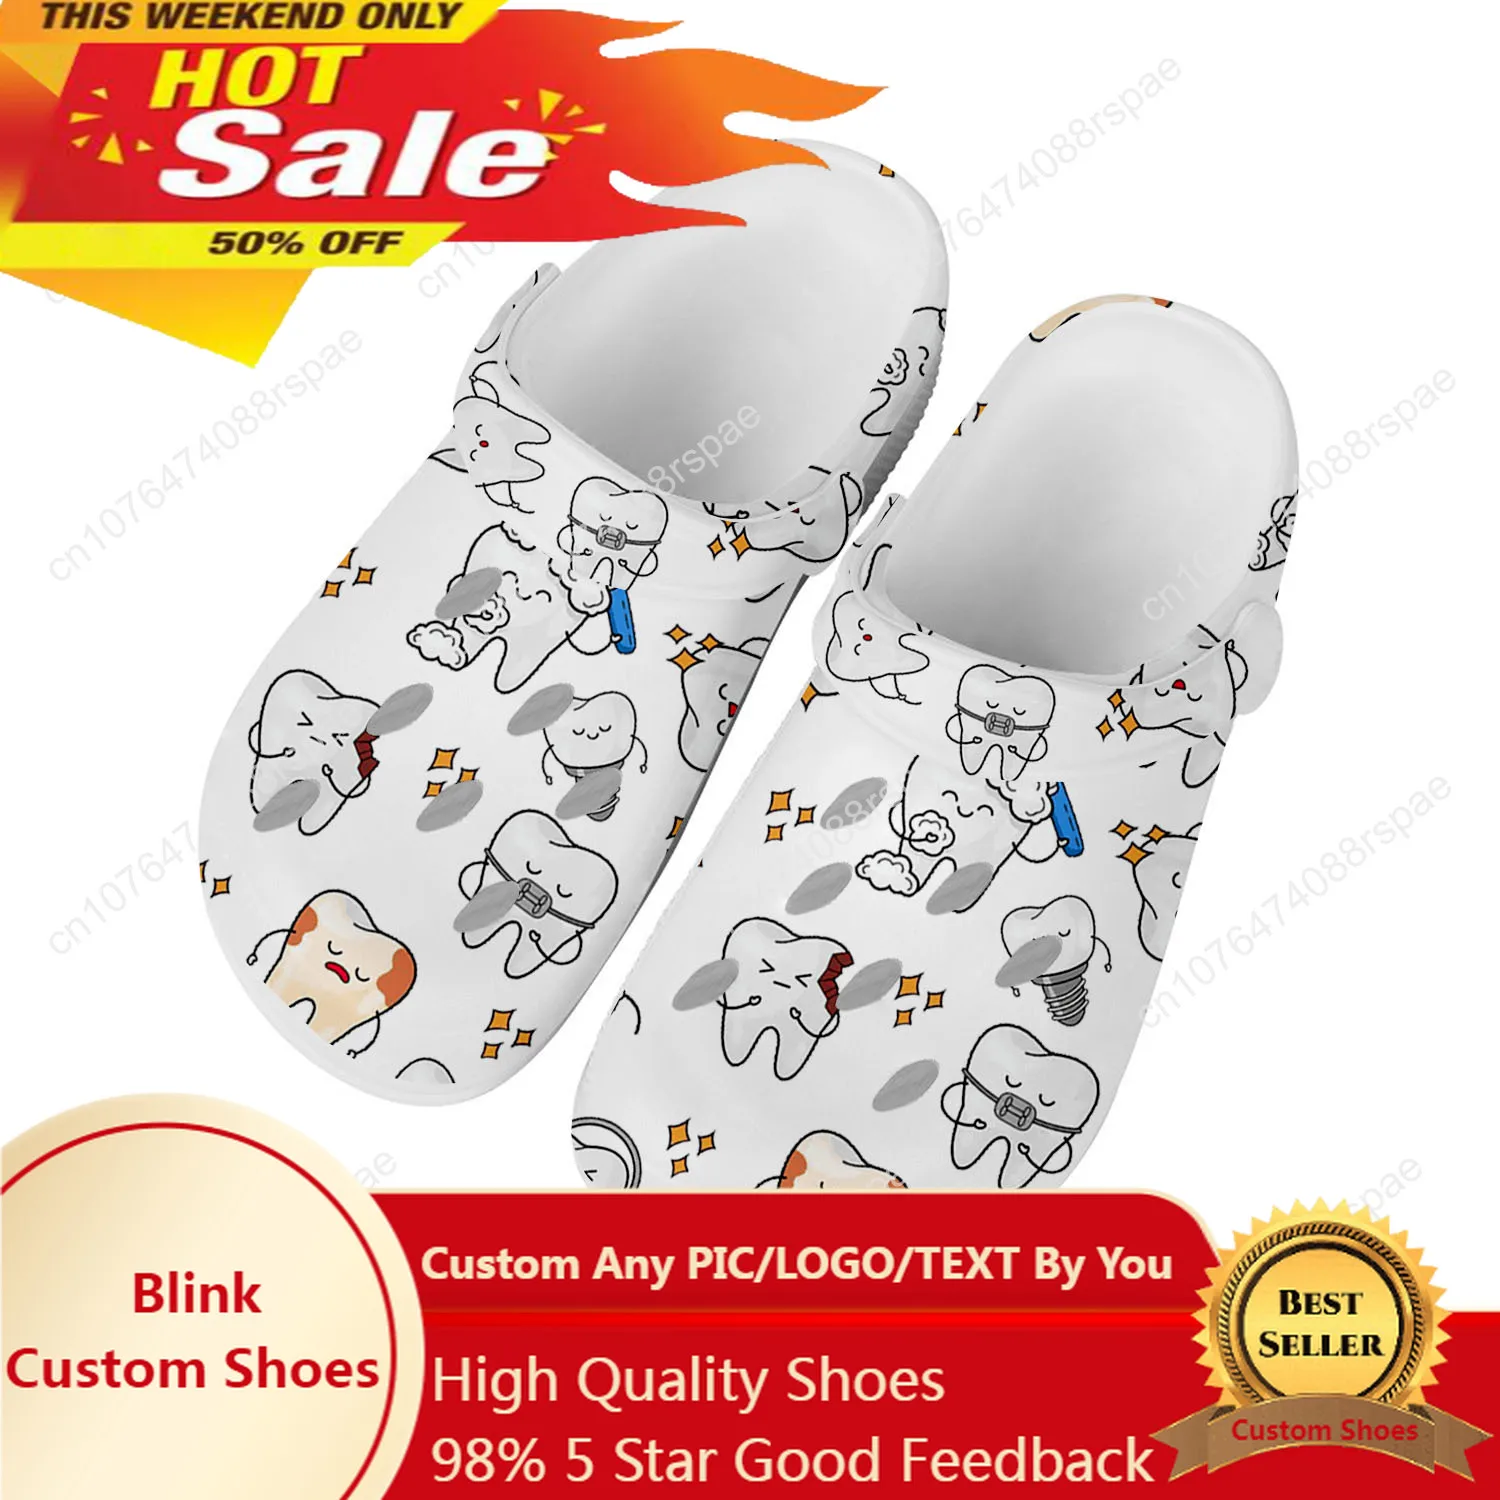 

Tooth Dentist Cartoon Home Clogs Custom Water Shoes Mens Womens Teenager Sandals Garden Clog Breathable Beach Hole Slippers